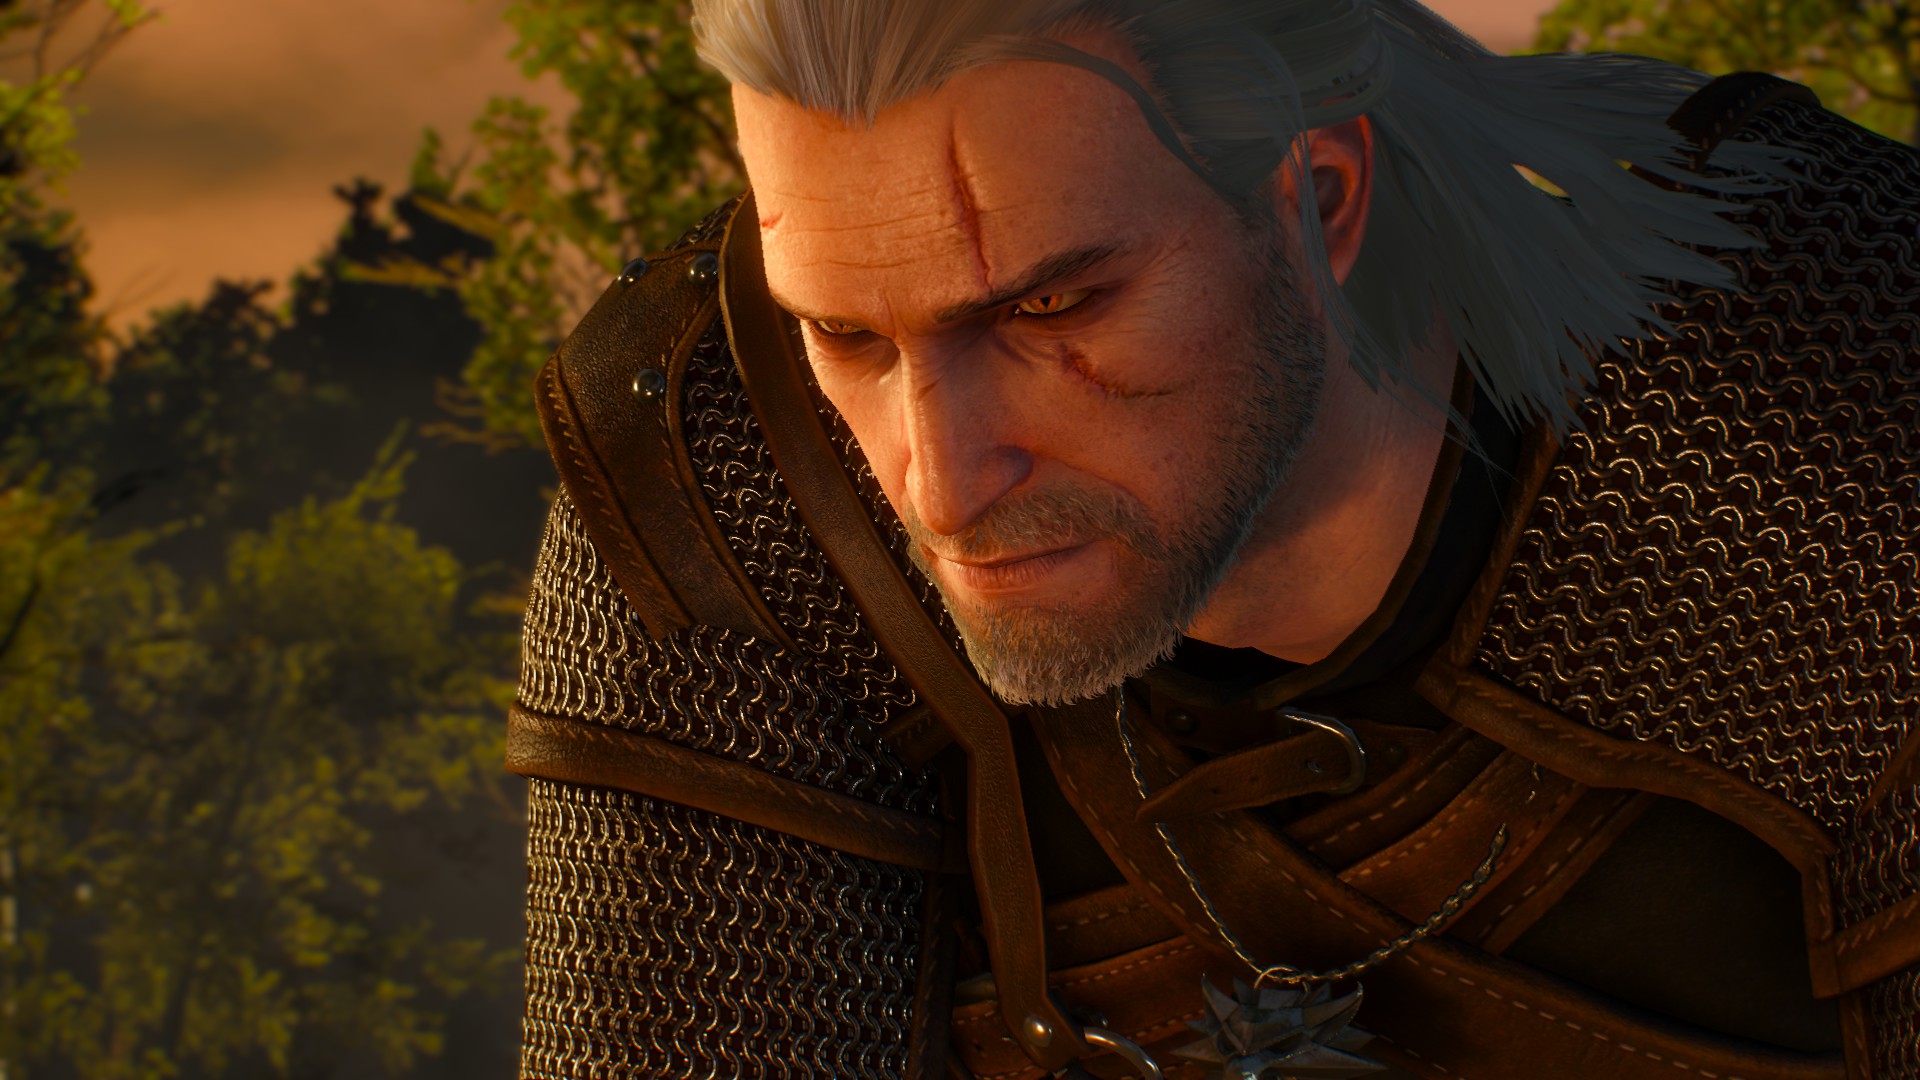 We Talk About The Witcher 3’s Awesome Quests